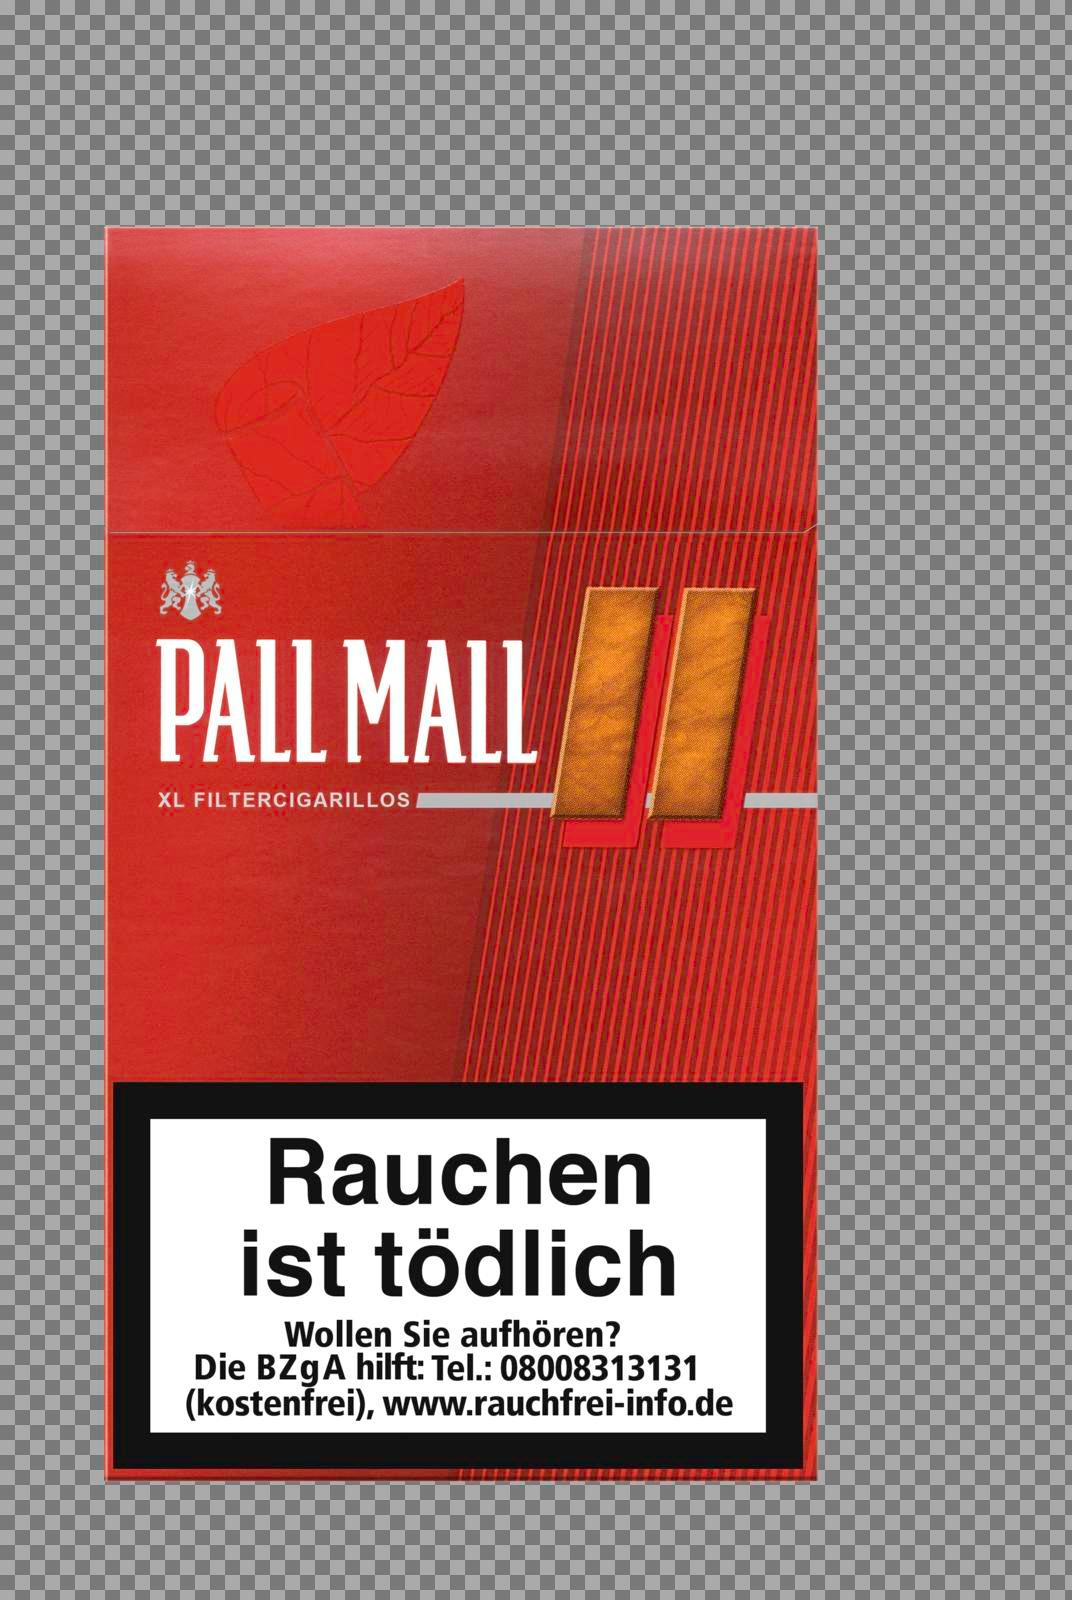 Pall Mall XL Filter Cigarillo Red